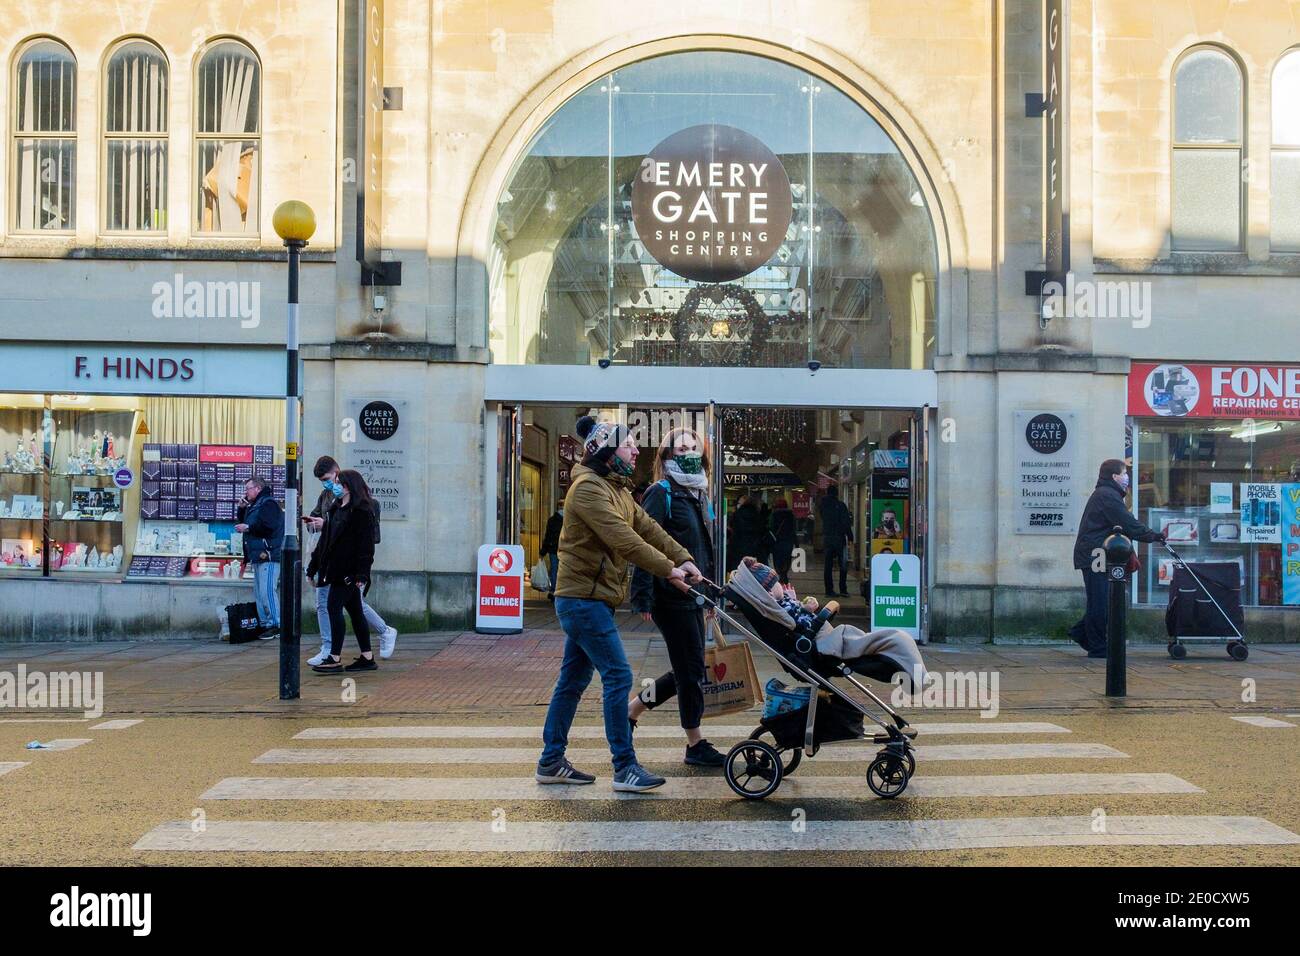 Chippenham, Wiltshire, UK. 31st December, 2020. With most areas of England in COVID protection level 4, shoppers in Chippenham, Wiltshire which is in COVID protection level 3 are pictured on the last day of 2020 as they make the most of the freedoms that level 3 allows.  Credit: Lynchpics/Alamy Live News Stock Photo